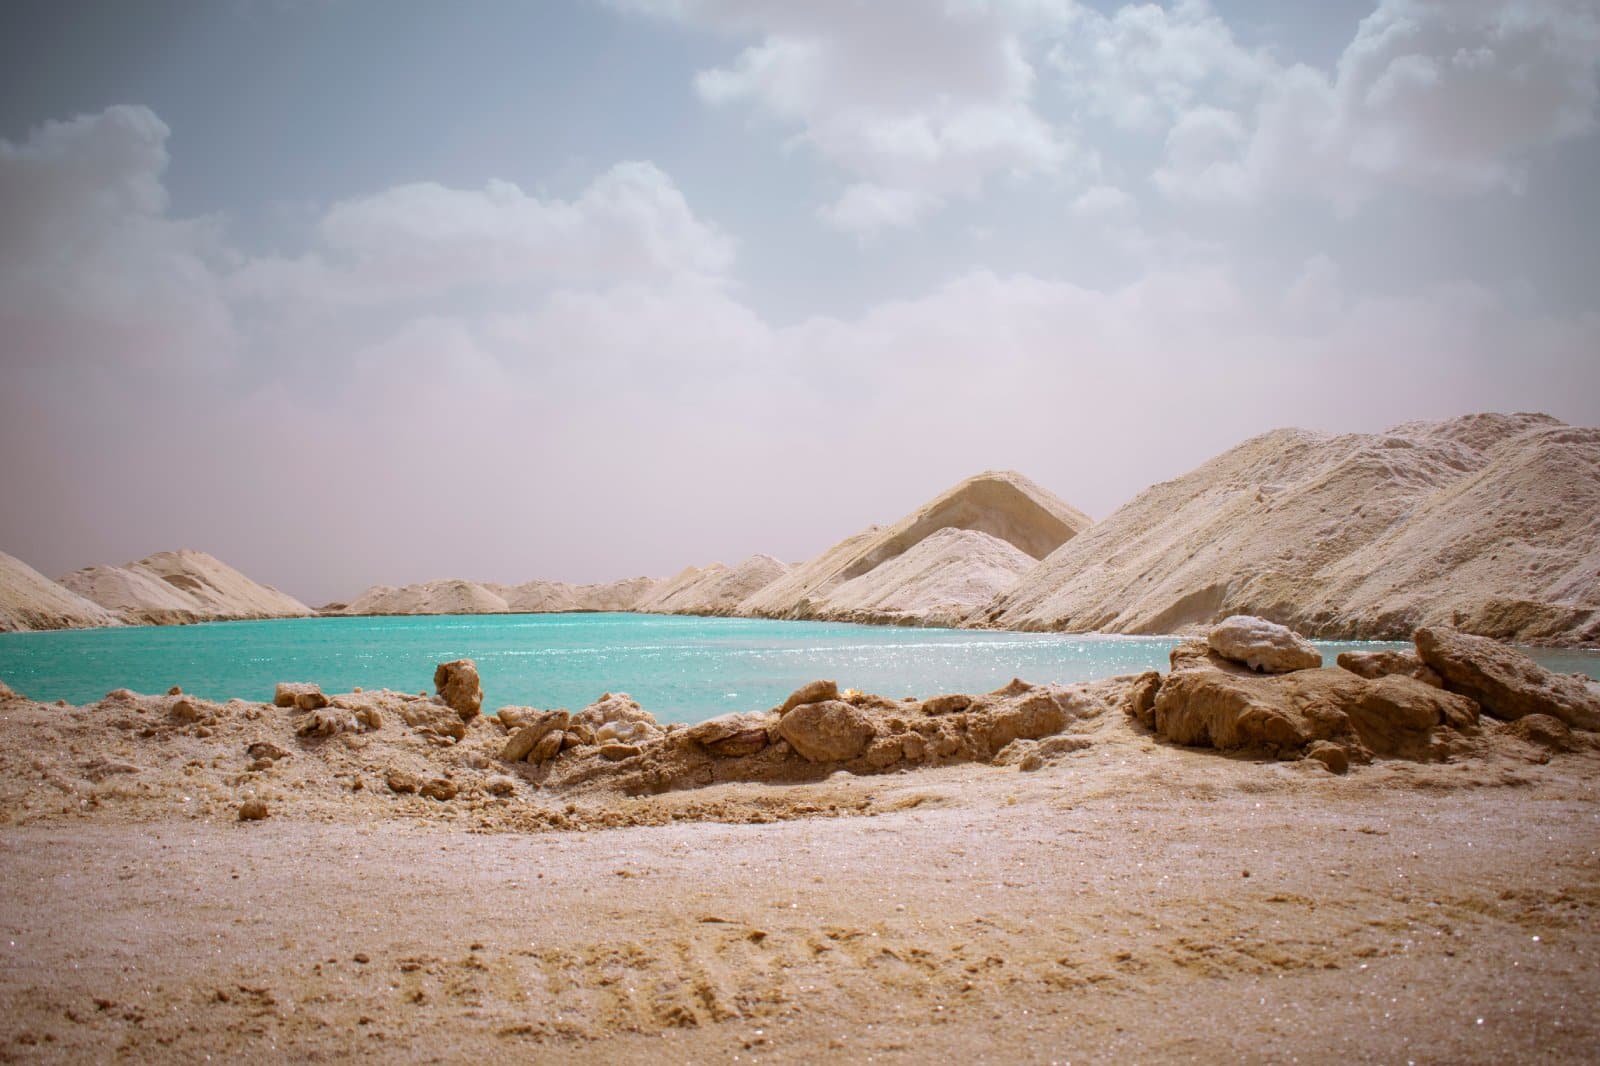 <p class="wp-caption-text">Image Credit: Shutterstock / Mai Hassan</p>  <p><span>Egypt’s Western Desert offers a landscape of sand dunes, mountainous plateaus, and unique geological formations, with Siwa Oasis as its crowning jewel. Siwa, known for its Berber culture, natural springs, and the Oracle of Amun, provides a tranquil retreat in the desert.</span></p>